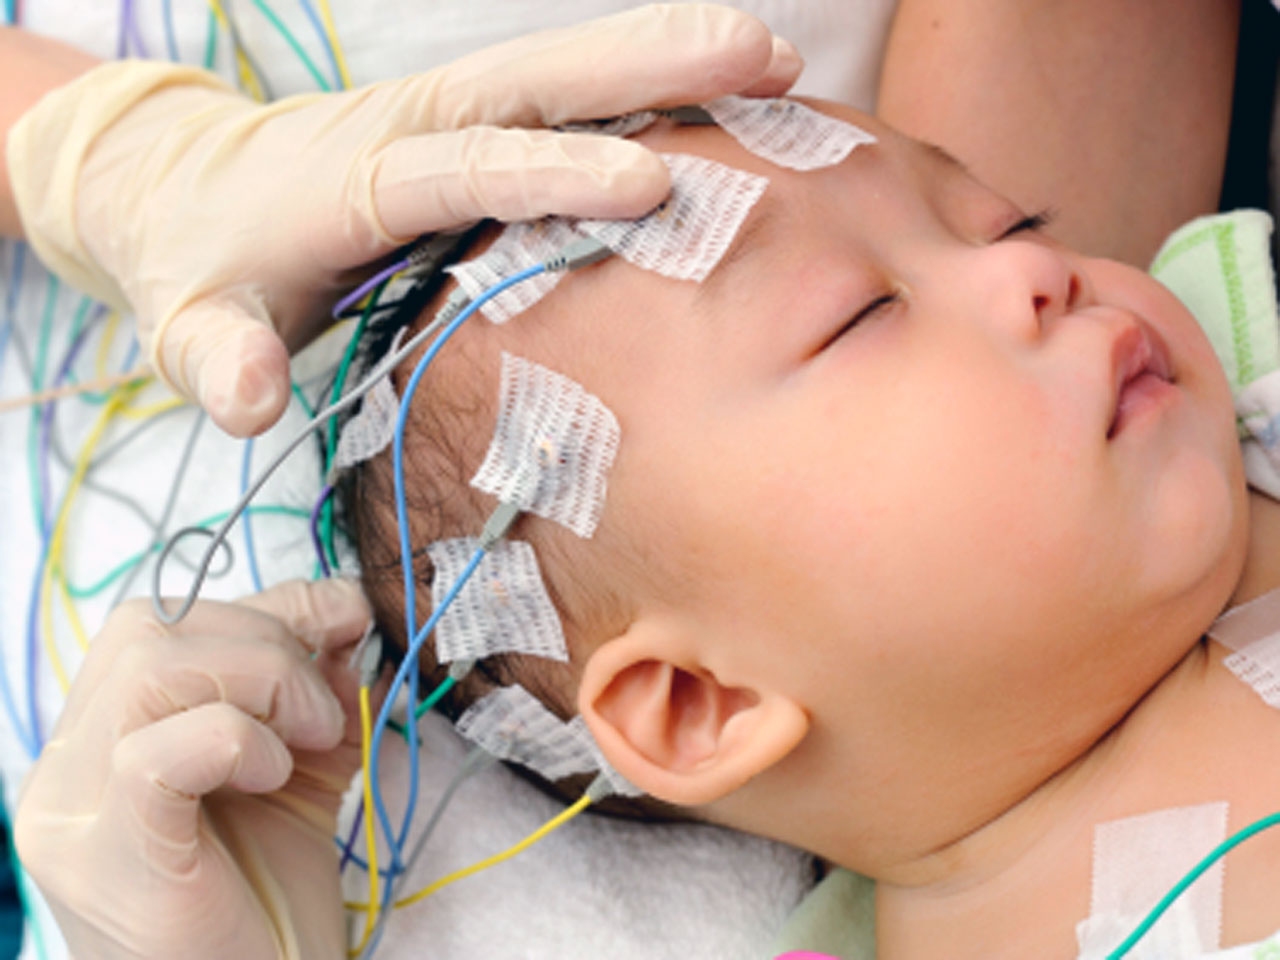 EEG brain scans may detect signs of autism in 2-year-olds - CBS News